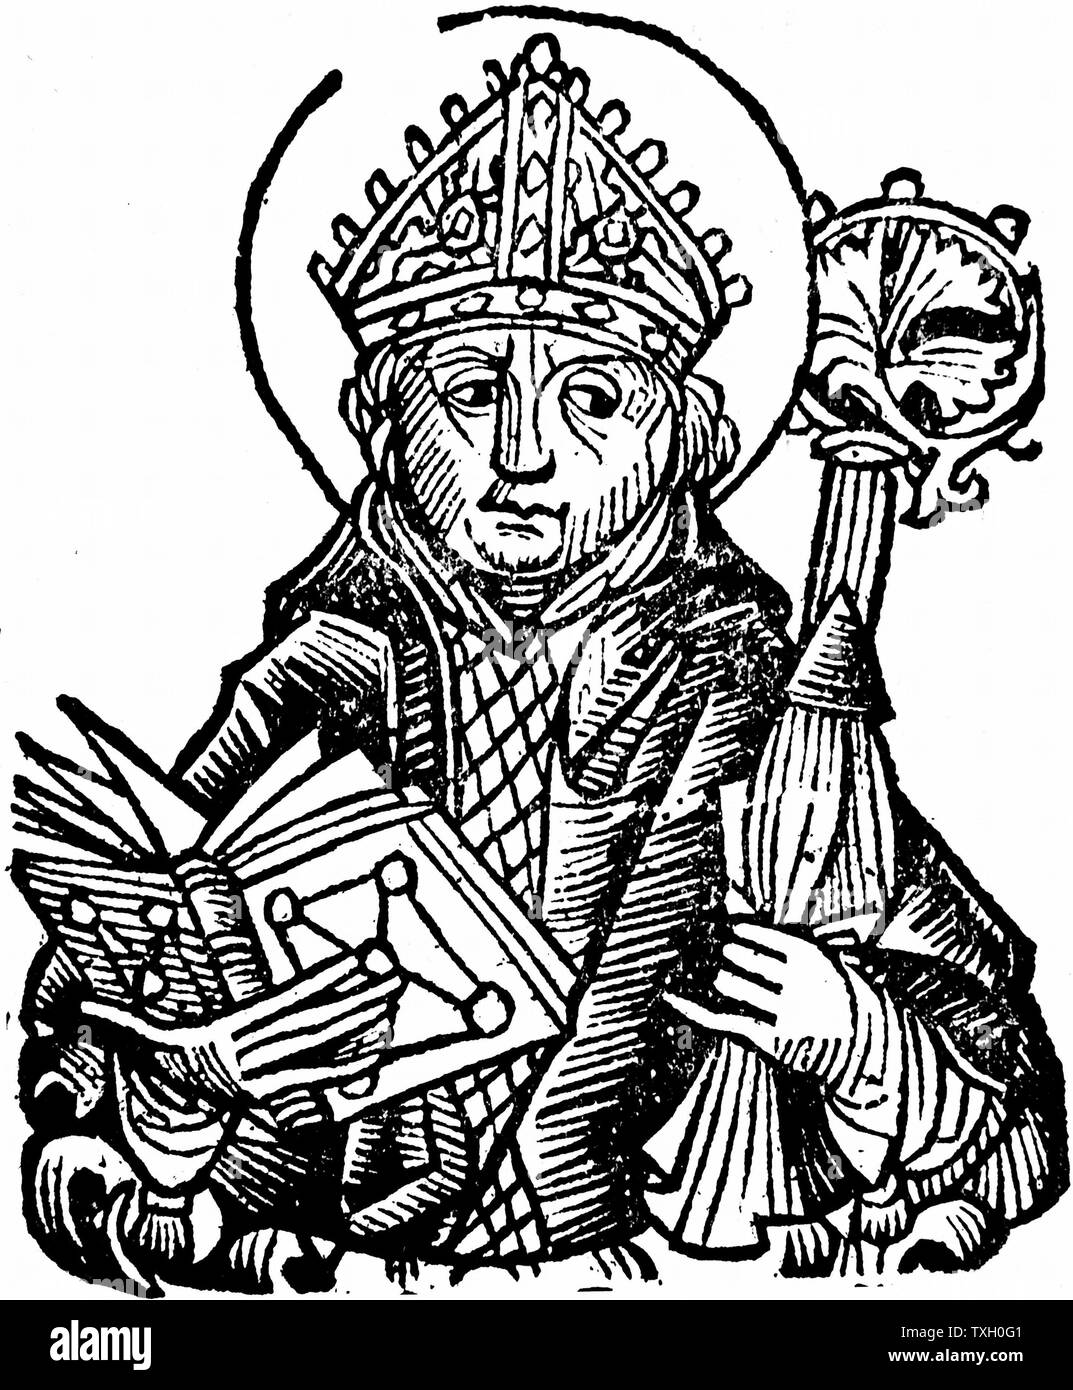 Thomas Becket (1118-70) English churchman, saint and martyr; Archbishop of Canterbury from 1178; murdered in Canterbury Cathedral. Woodcut from Hartmann Schedel 'Liber Chronicarum Mundi' (Nuremberg Chronicle) Nuremberg 1493. Stock Photo